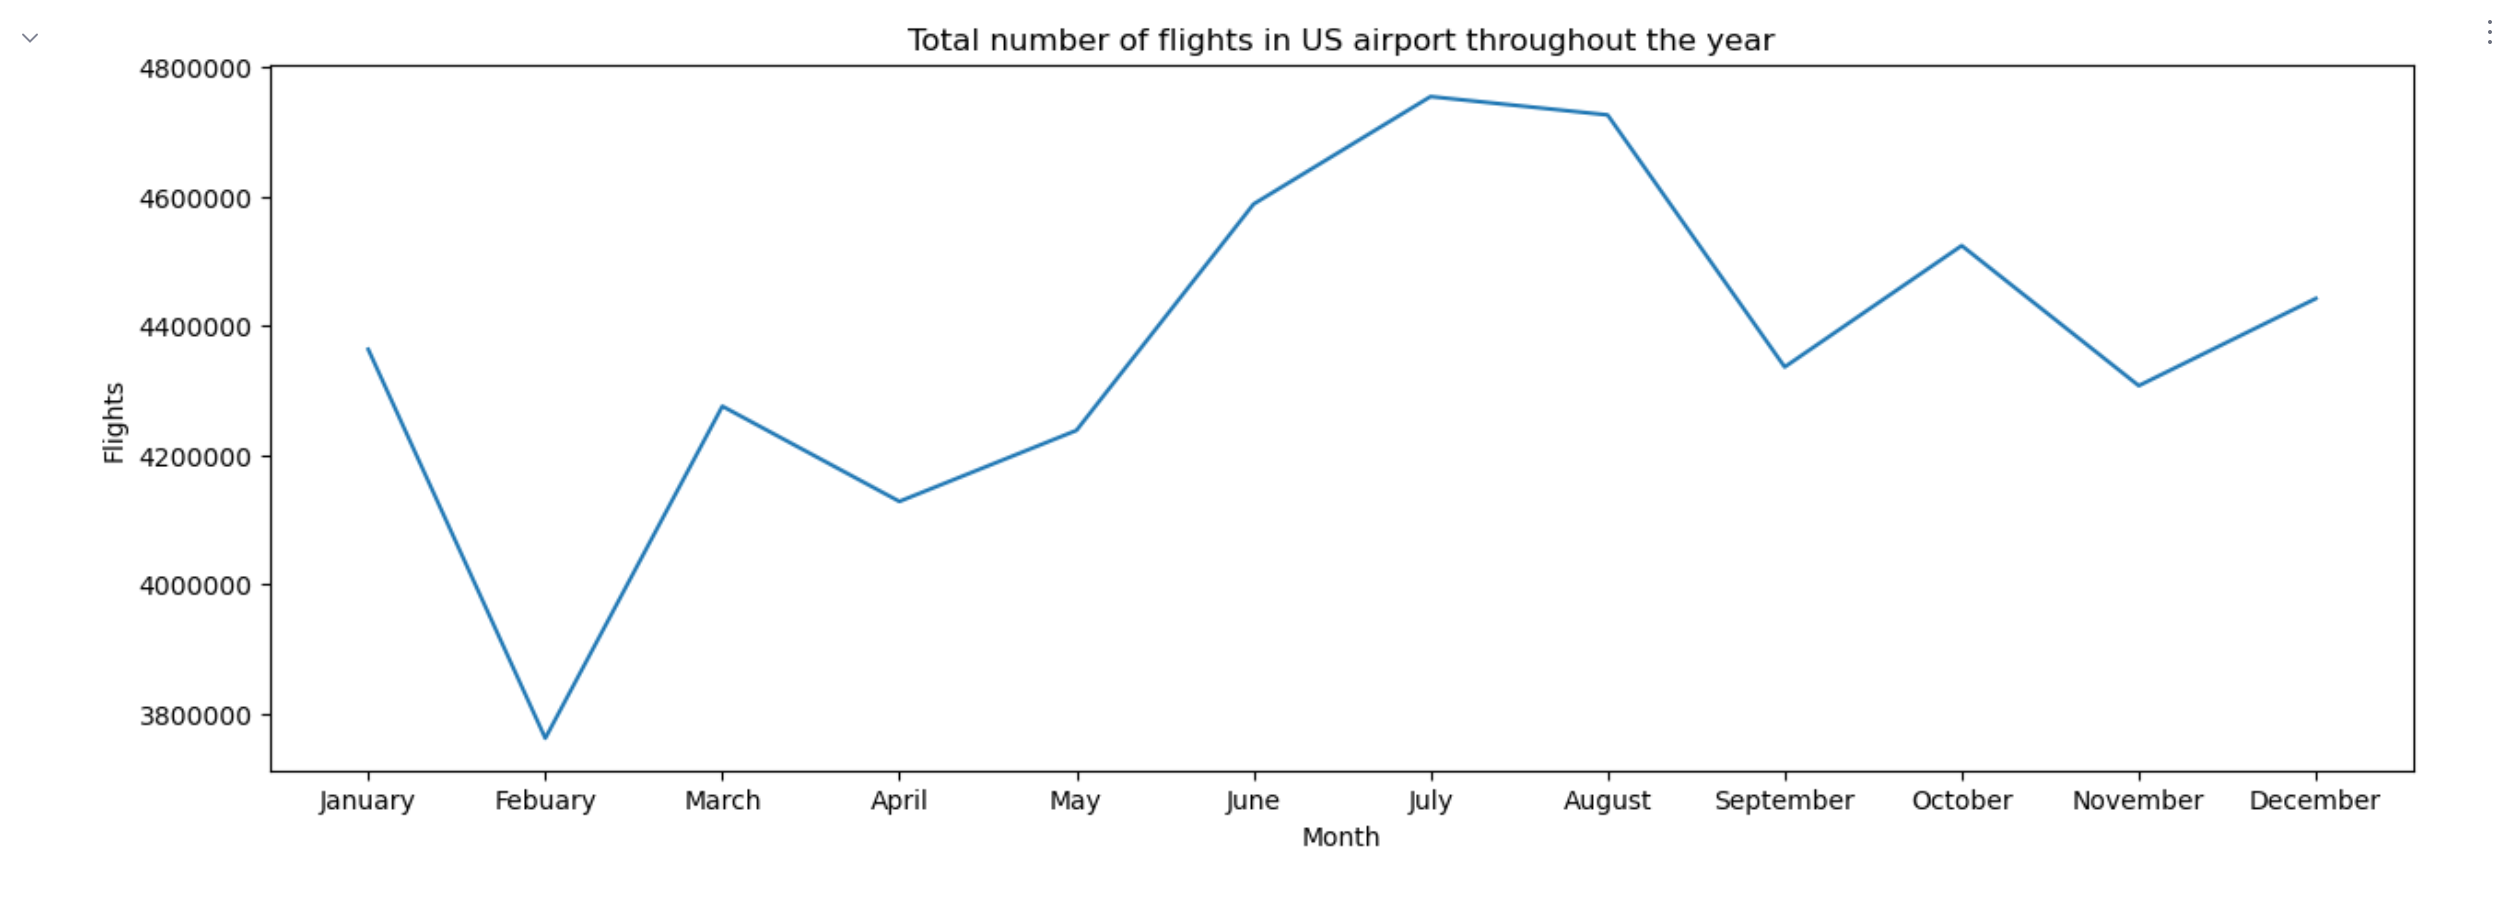 Total number of flights in US airports throughout the year